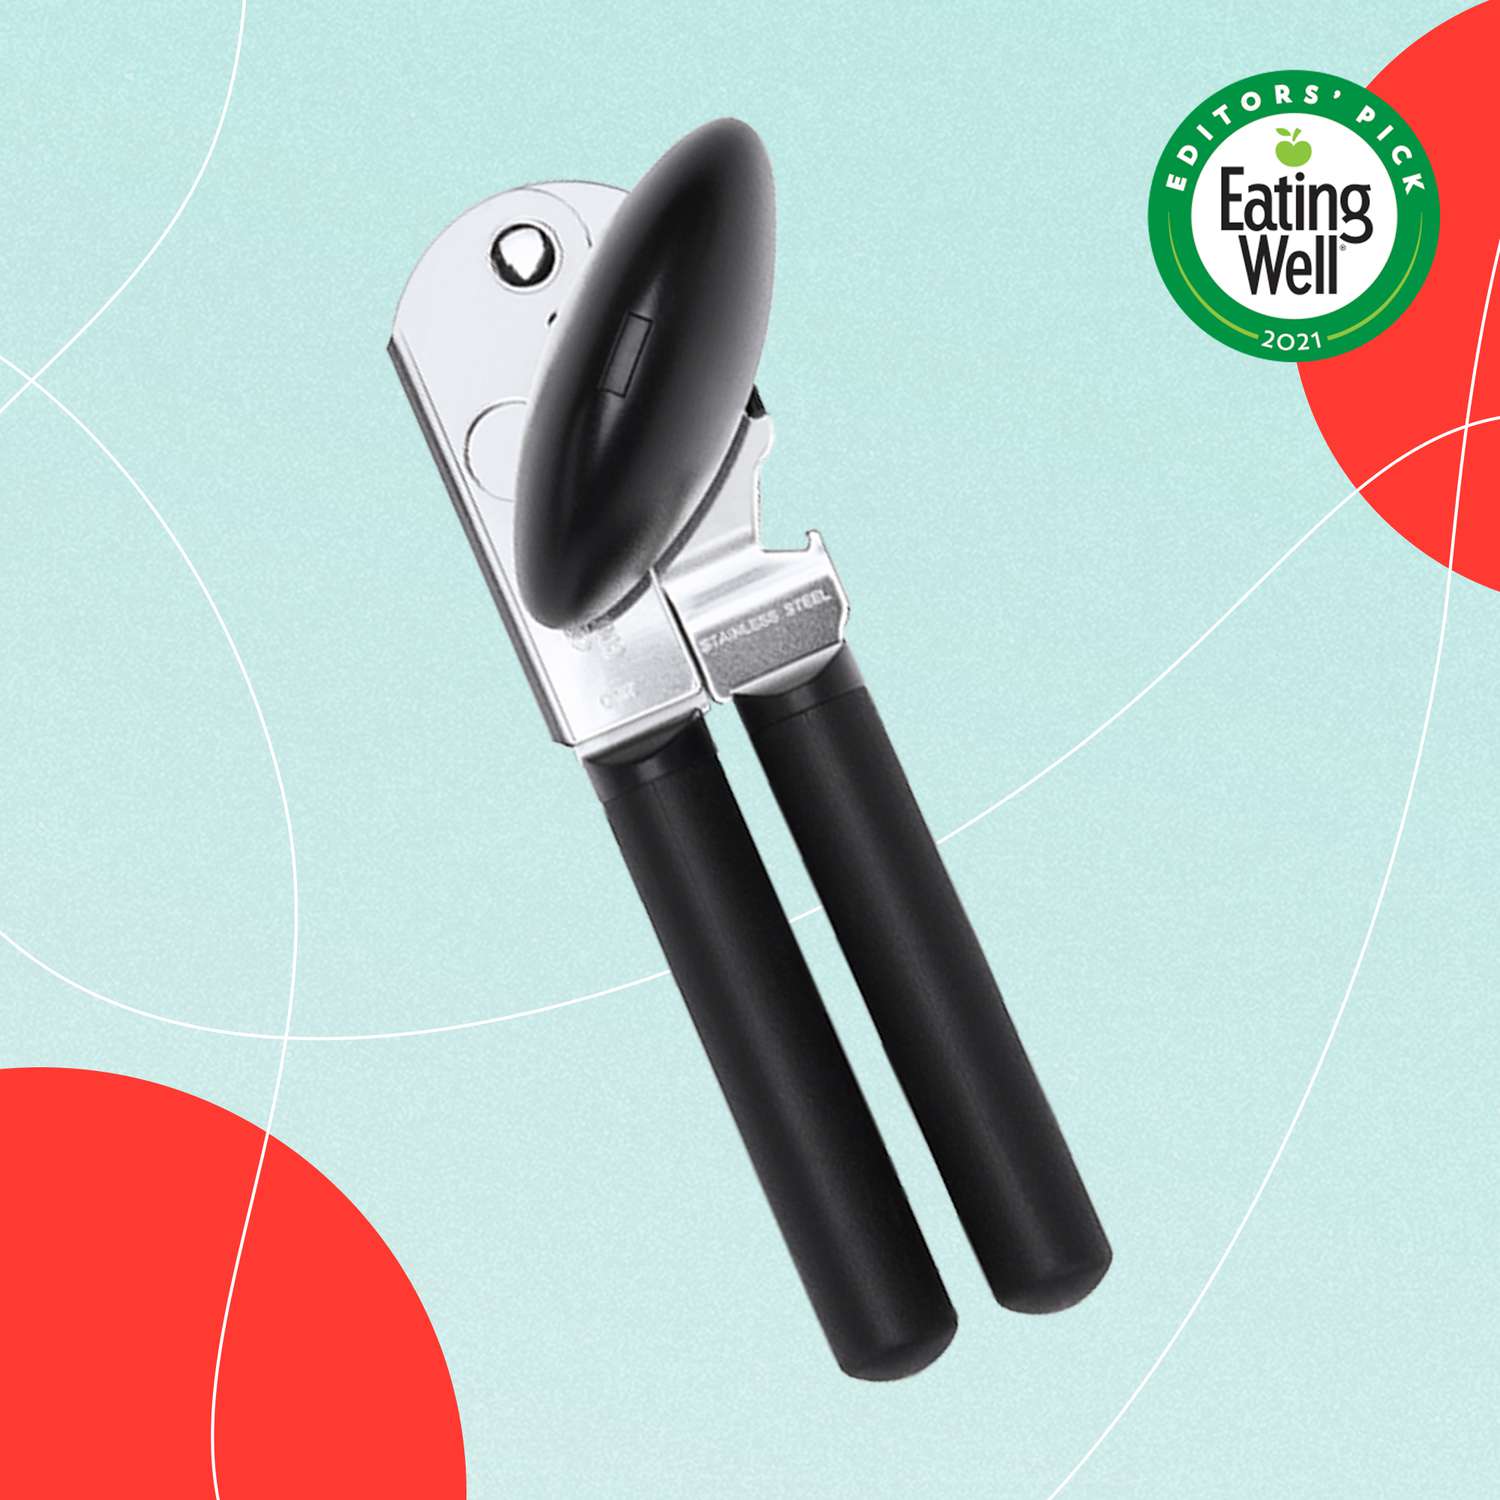 oxo soft handled can opener